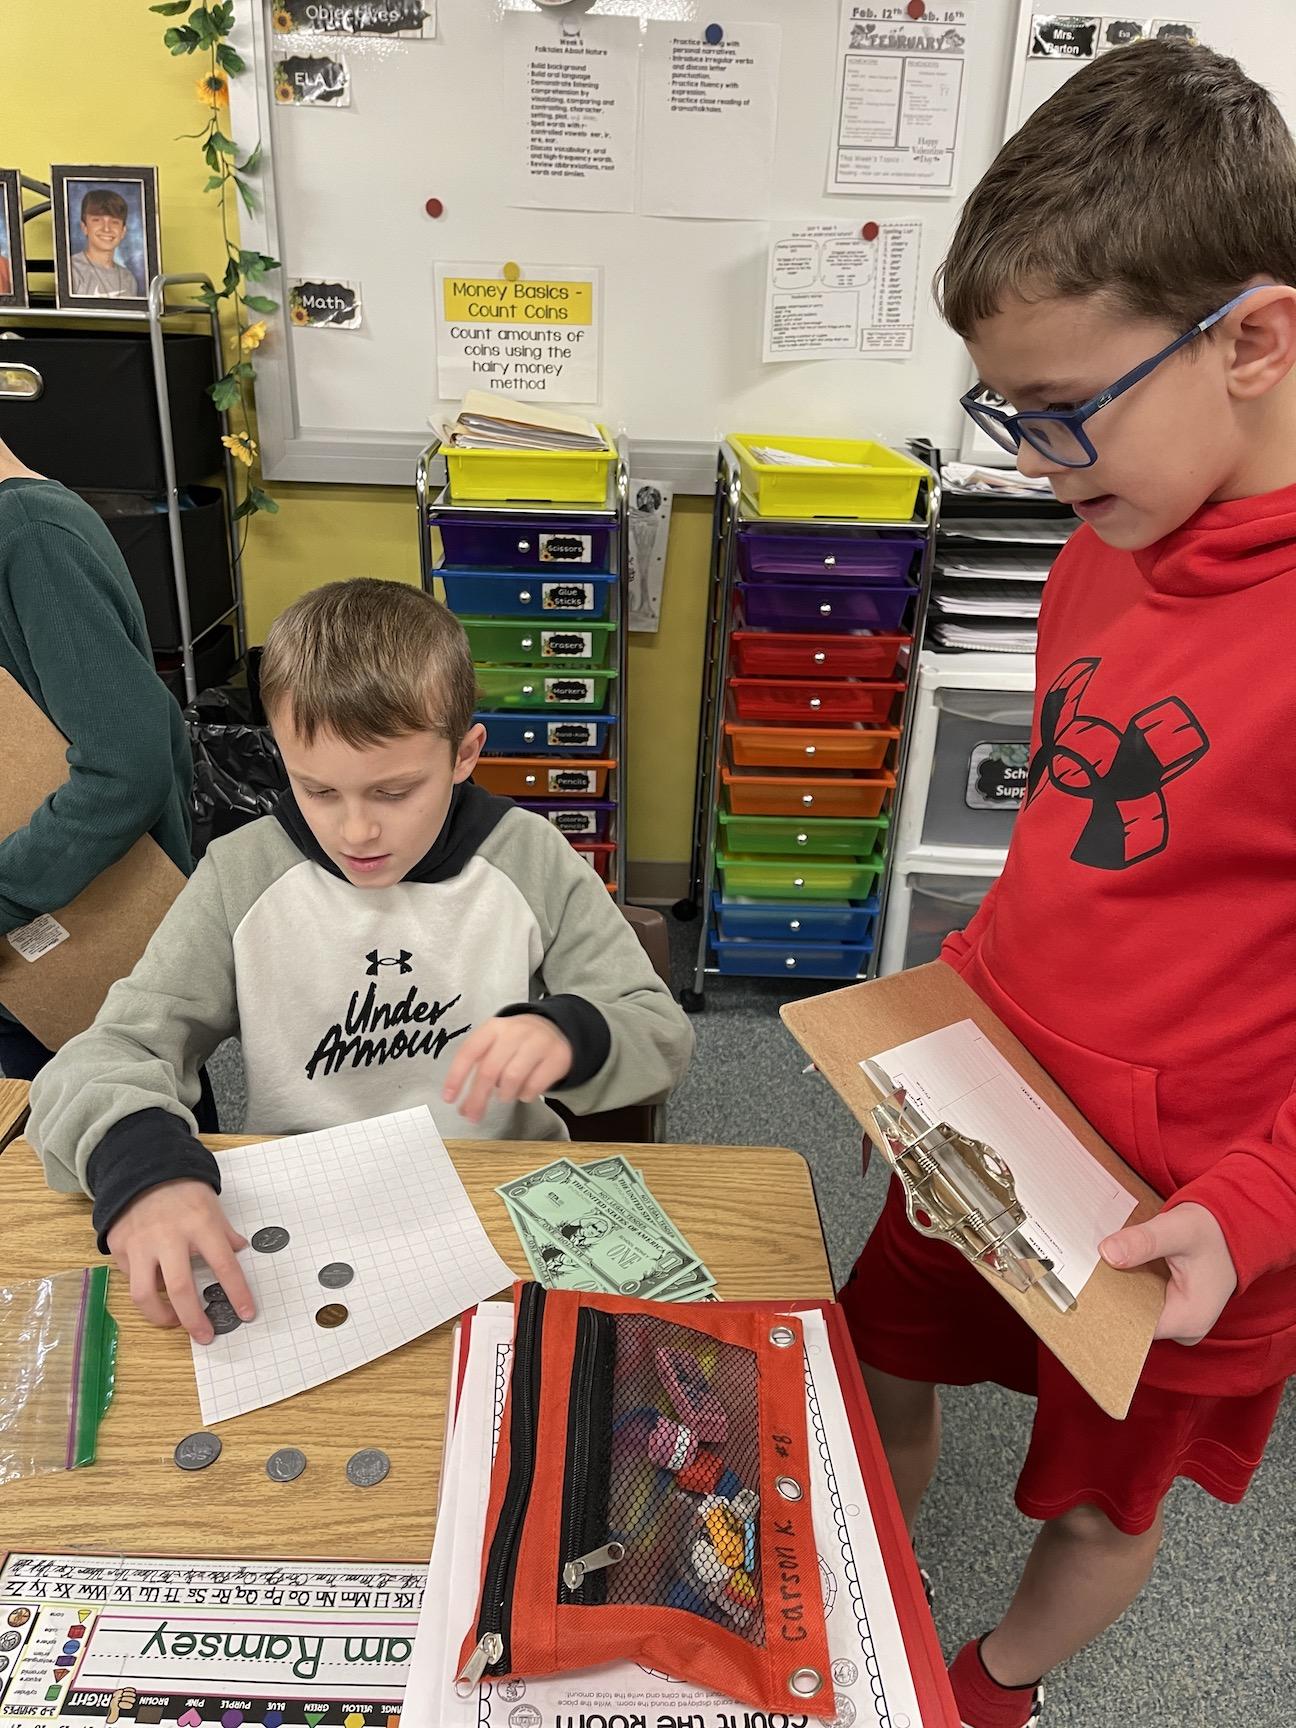 Carson Kalkstein and Brendan Bailey work together on counting money